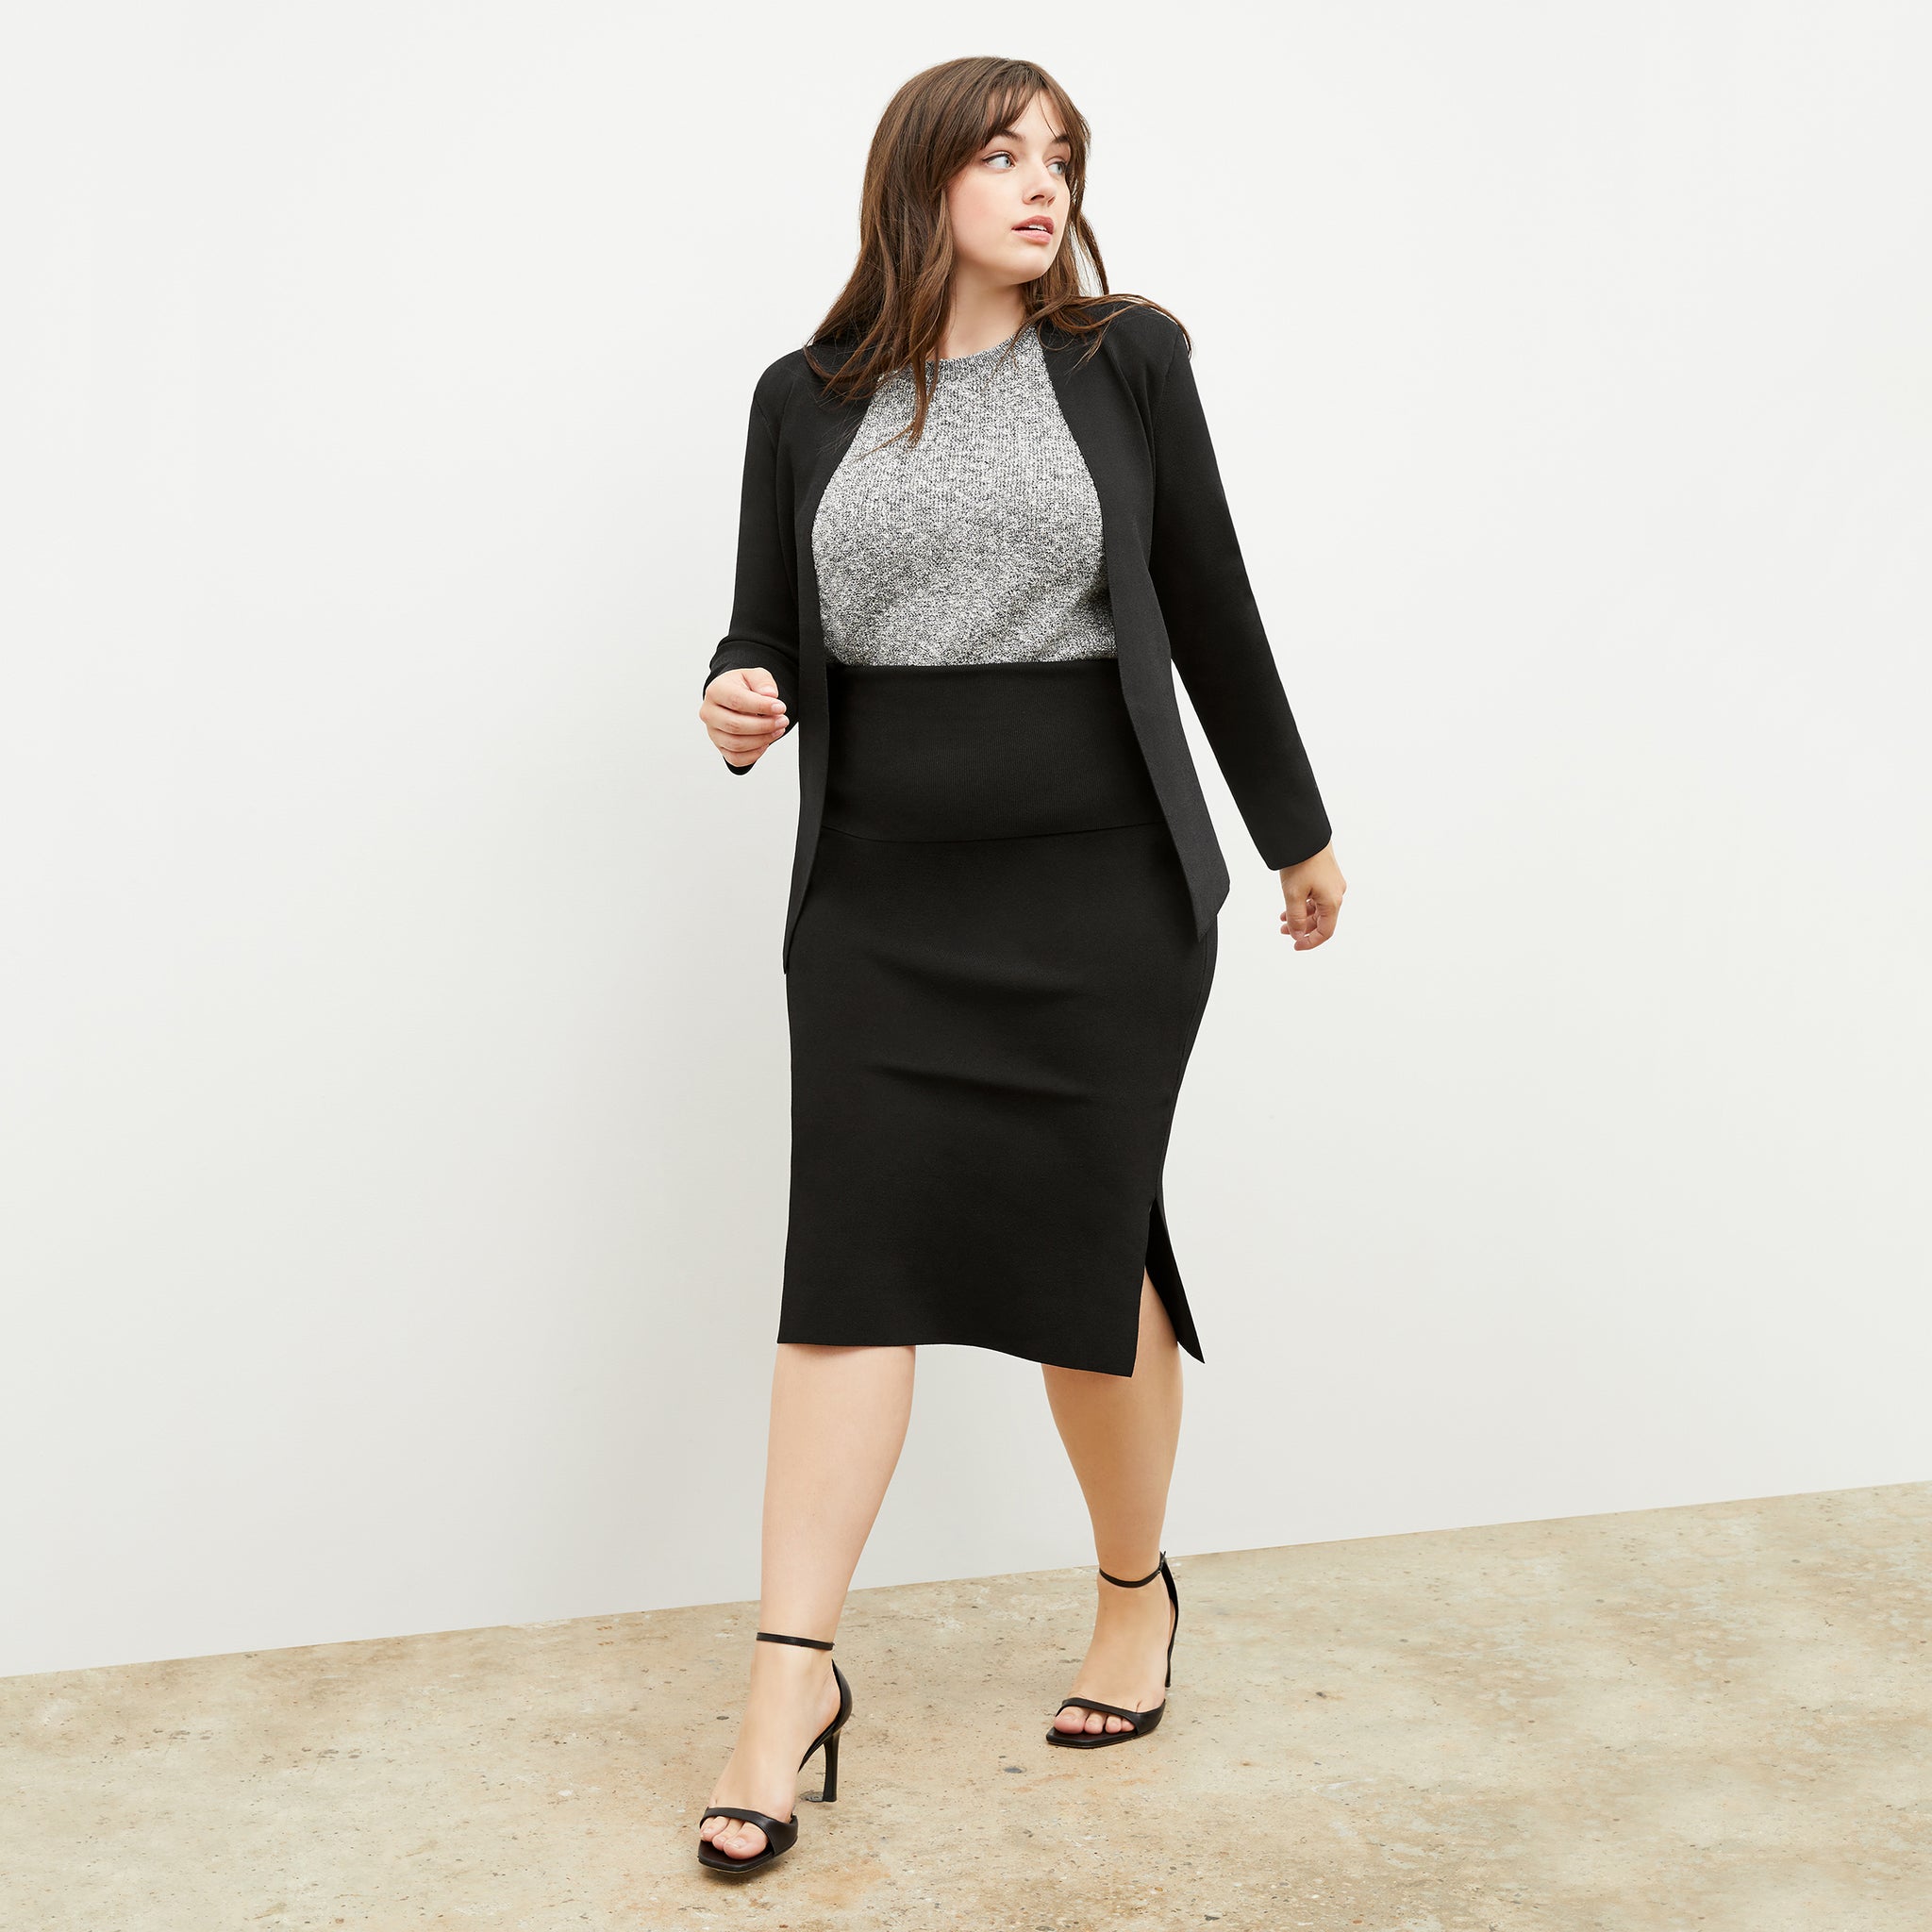 On the Go with M.M. LaFleur - That Pencil Skirt